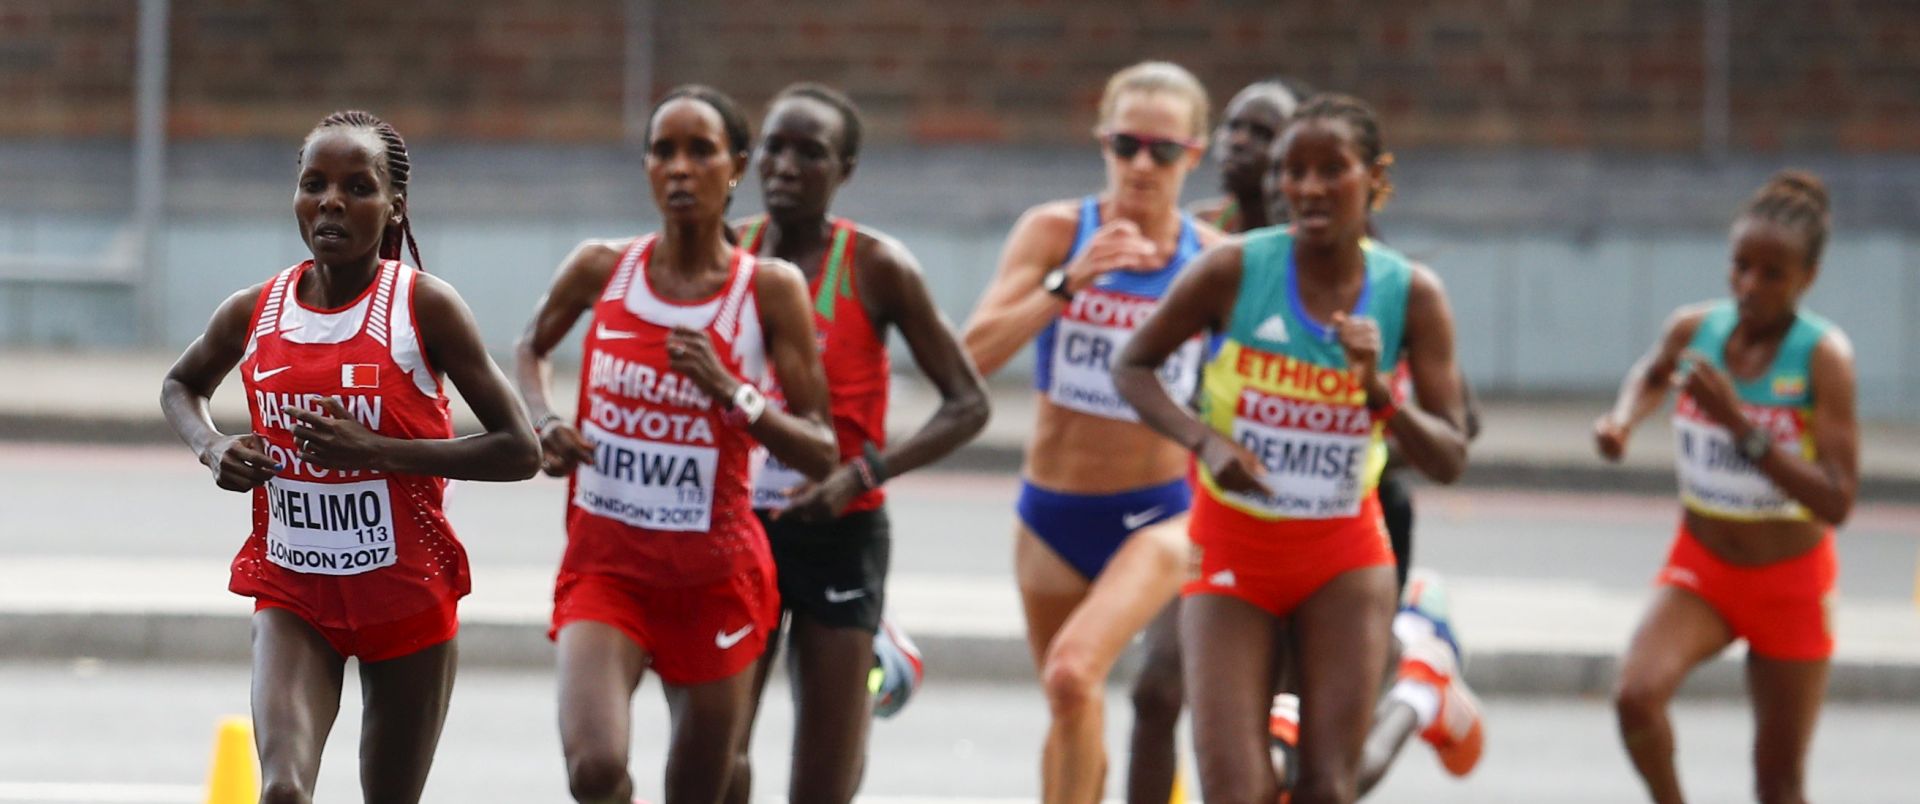 epa06128766 Rose Chelimo of Bahrain leads the pack of runners during the women's Marathon race at the London 2017 IAAF World Championships in London, Britain, 06 August 2017. Chelimo won the race. Chelimo won the race.  EPA/PHIL NOBLE / POOL